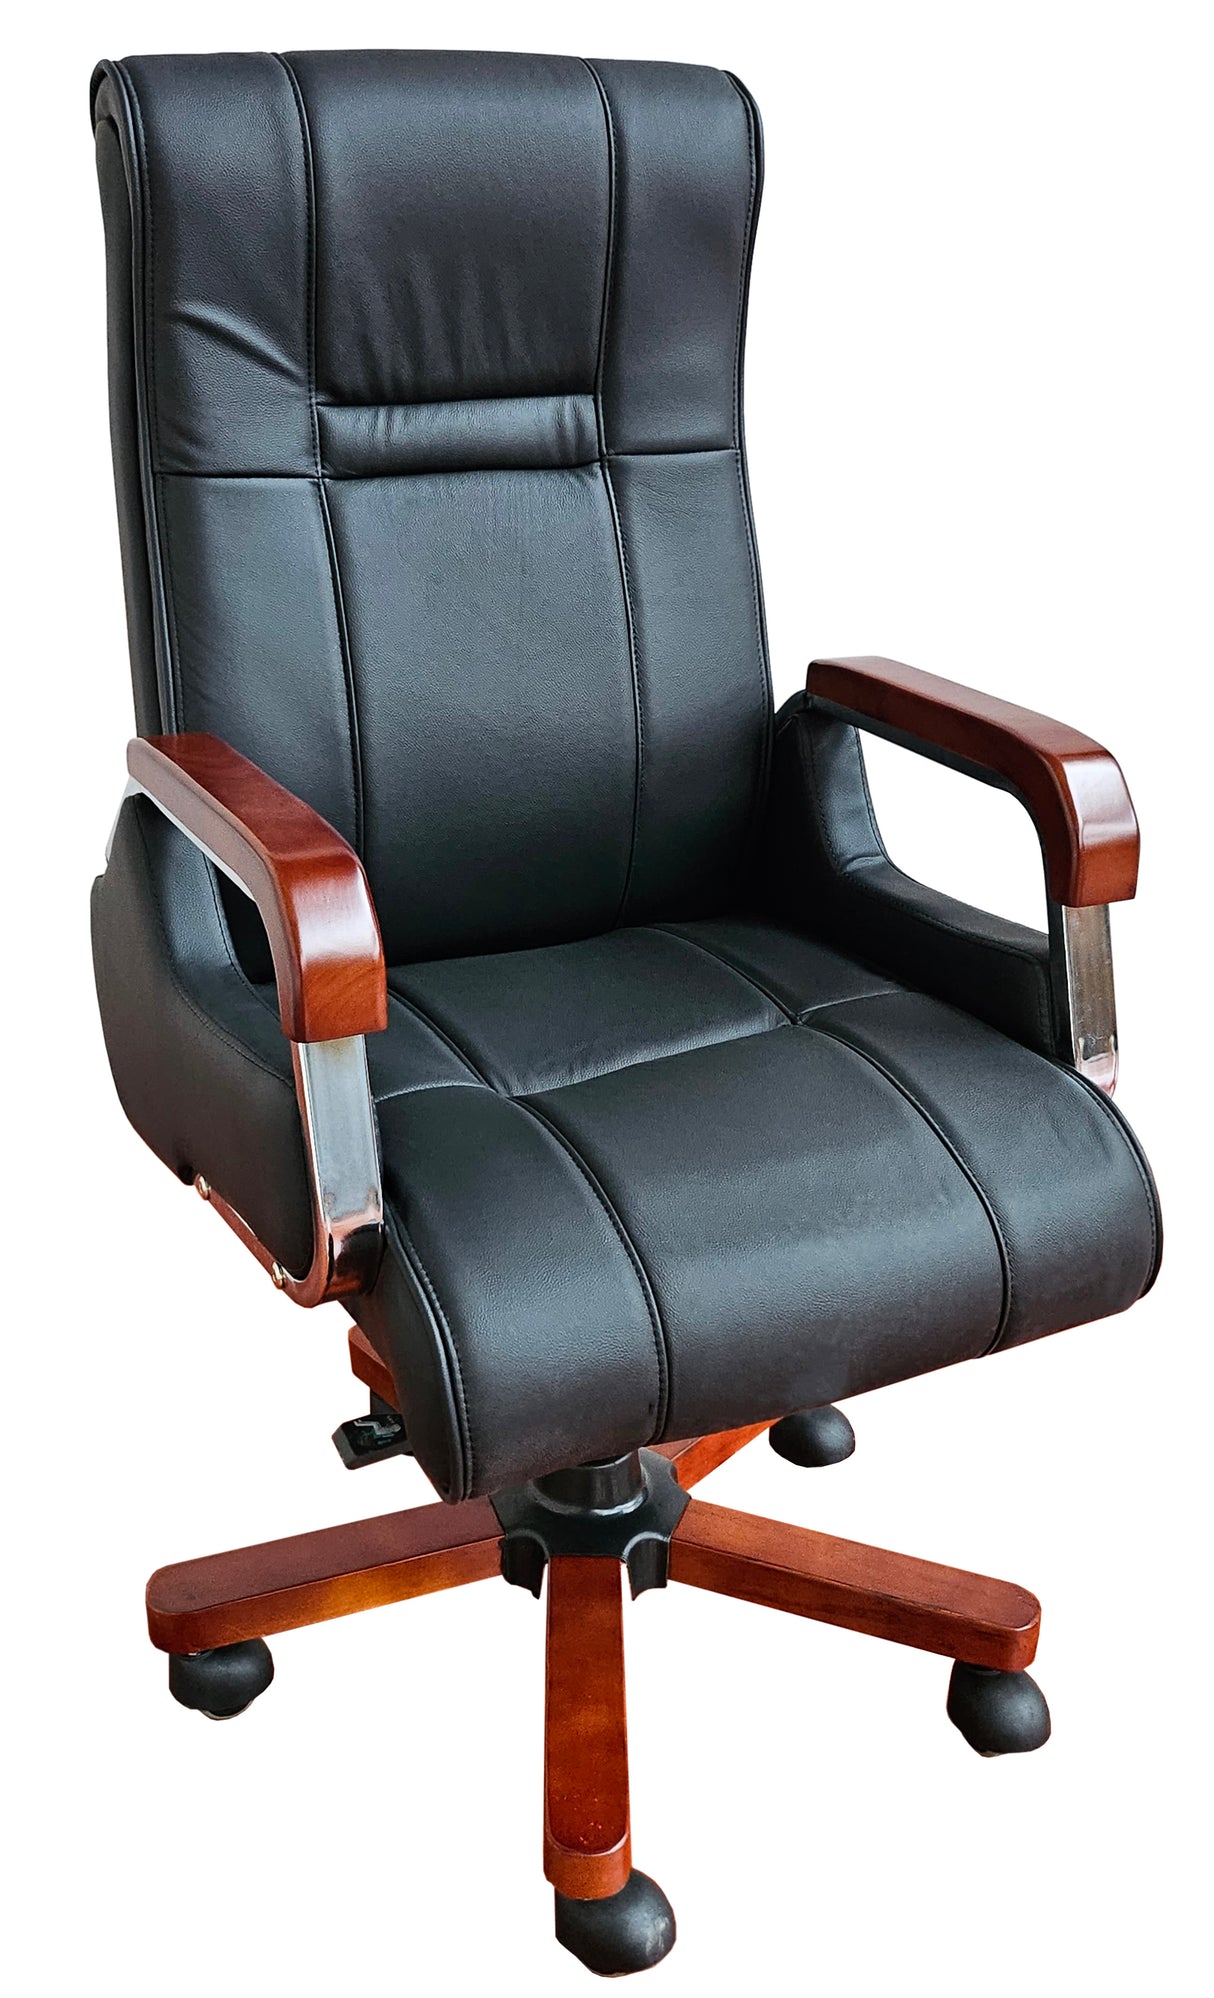 Black Executive Office Chair in Genuine Leather - HM003B